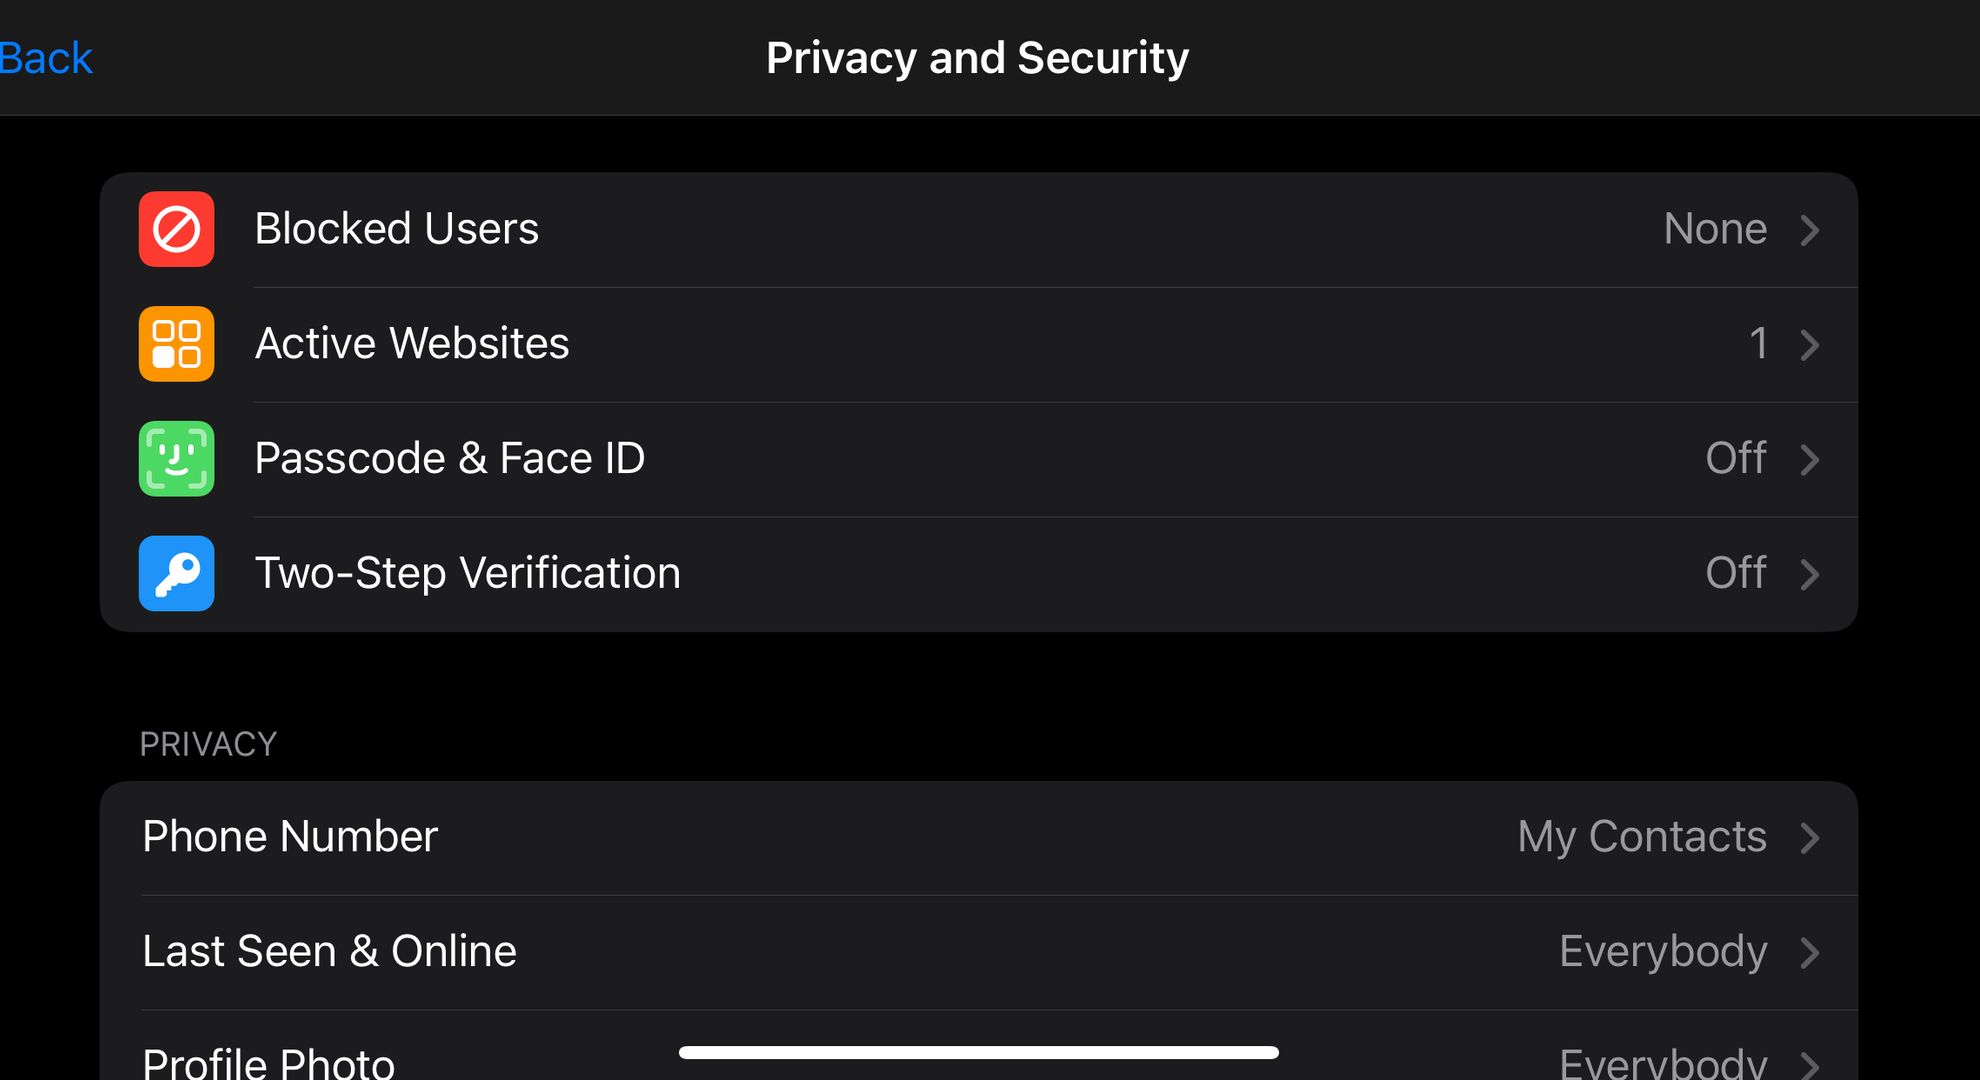 Telegram's privacy and security screen on iOS.